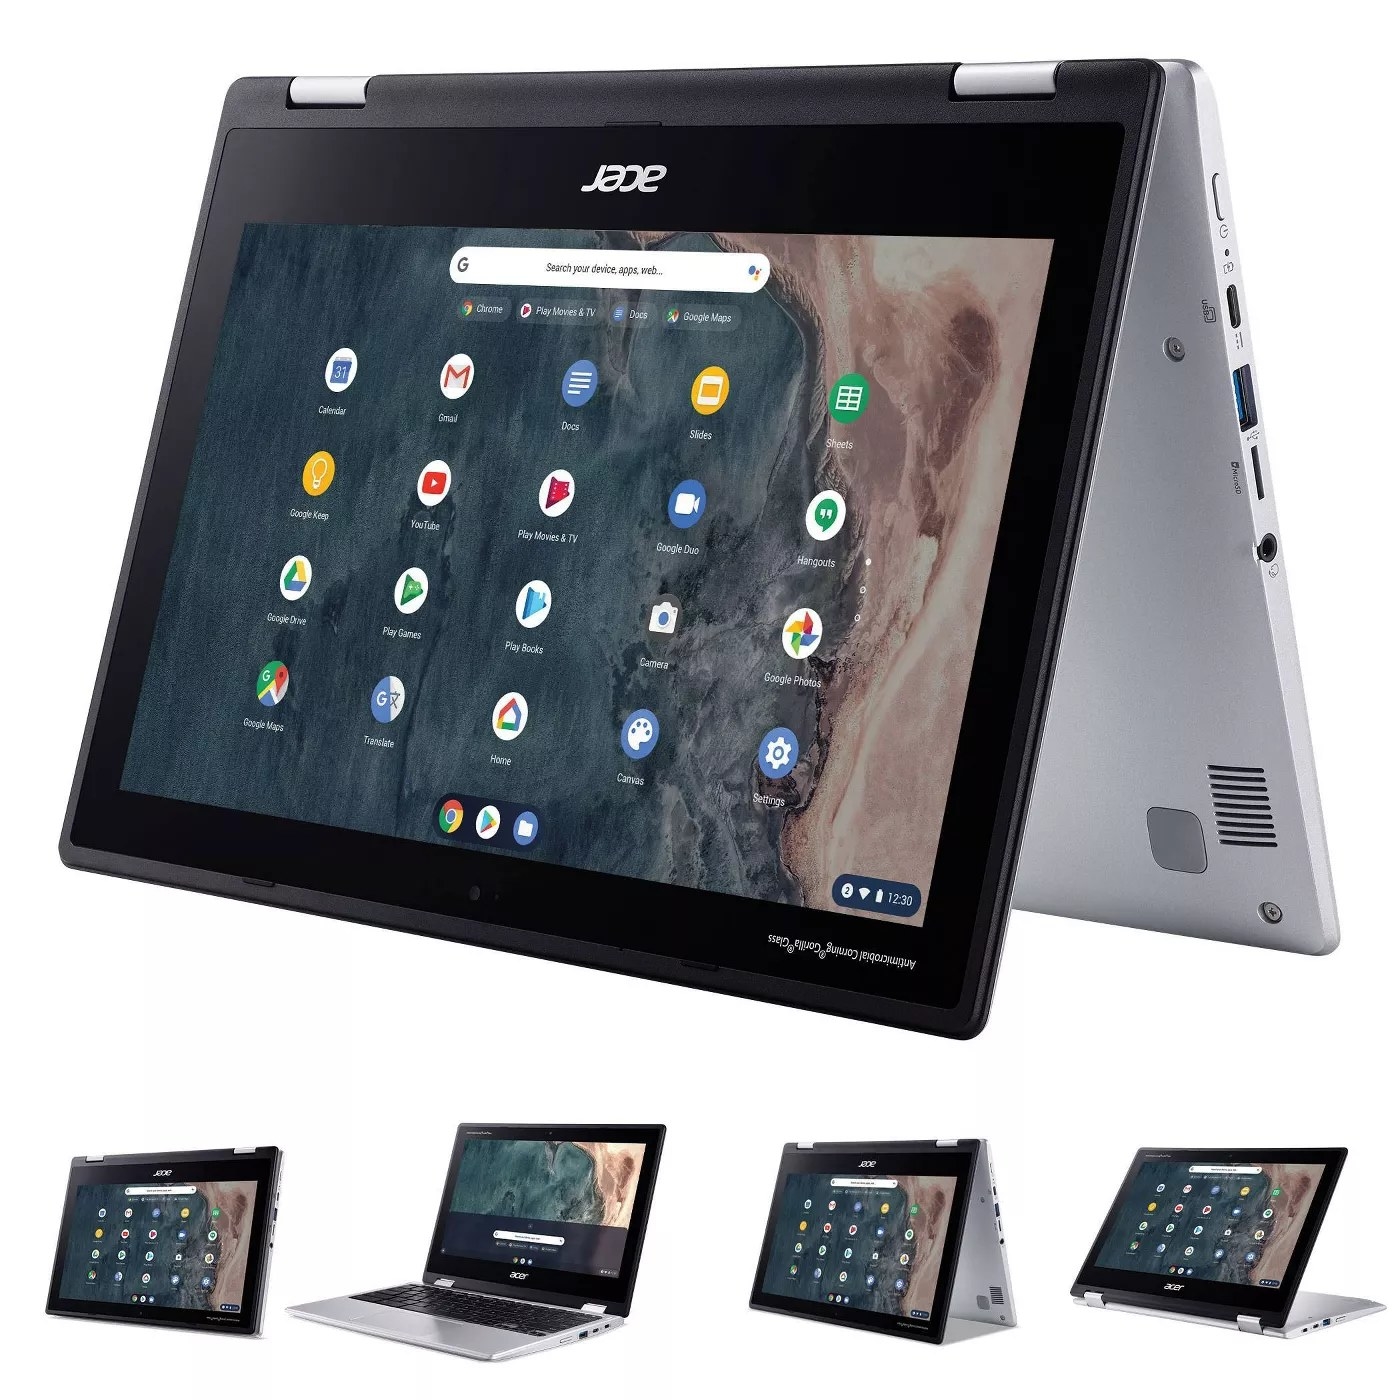 The Acer laptop reconfigured into a tablet, a tent, a stand-up display, and a notebook